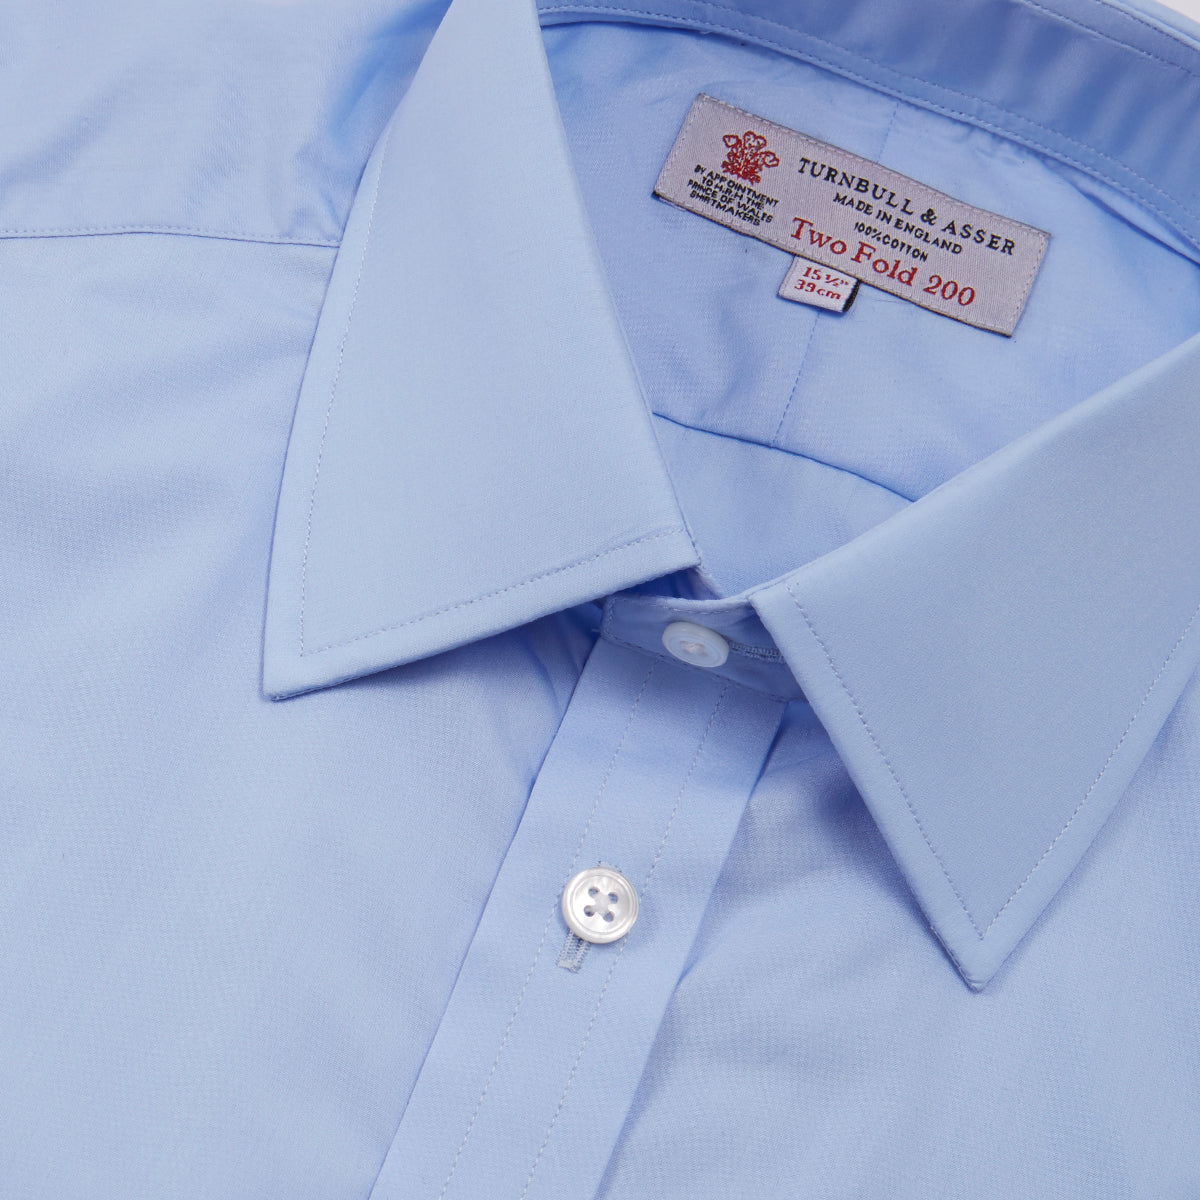 Two-Fold 200 Blue Cotton Shirt with T&A Collar and Double Cuffs